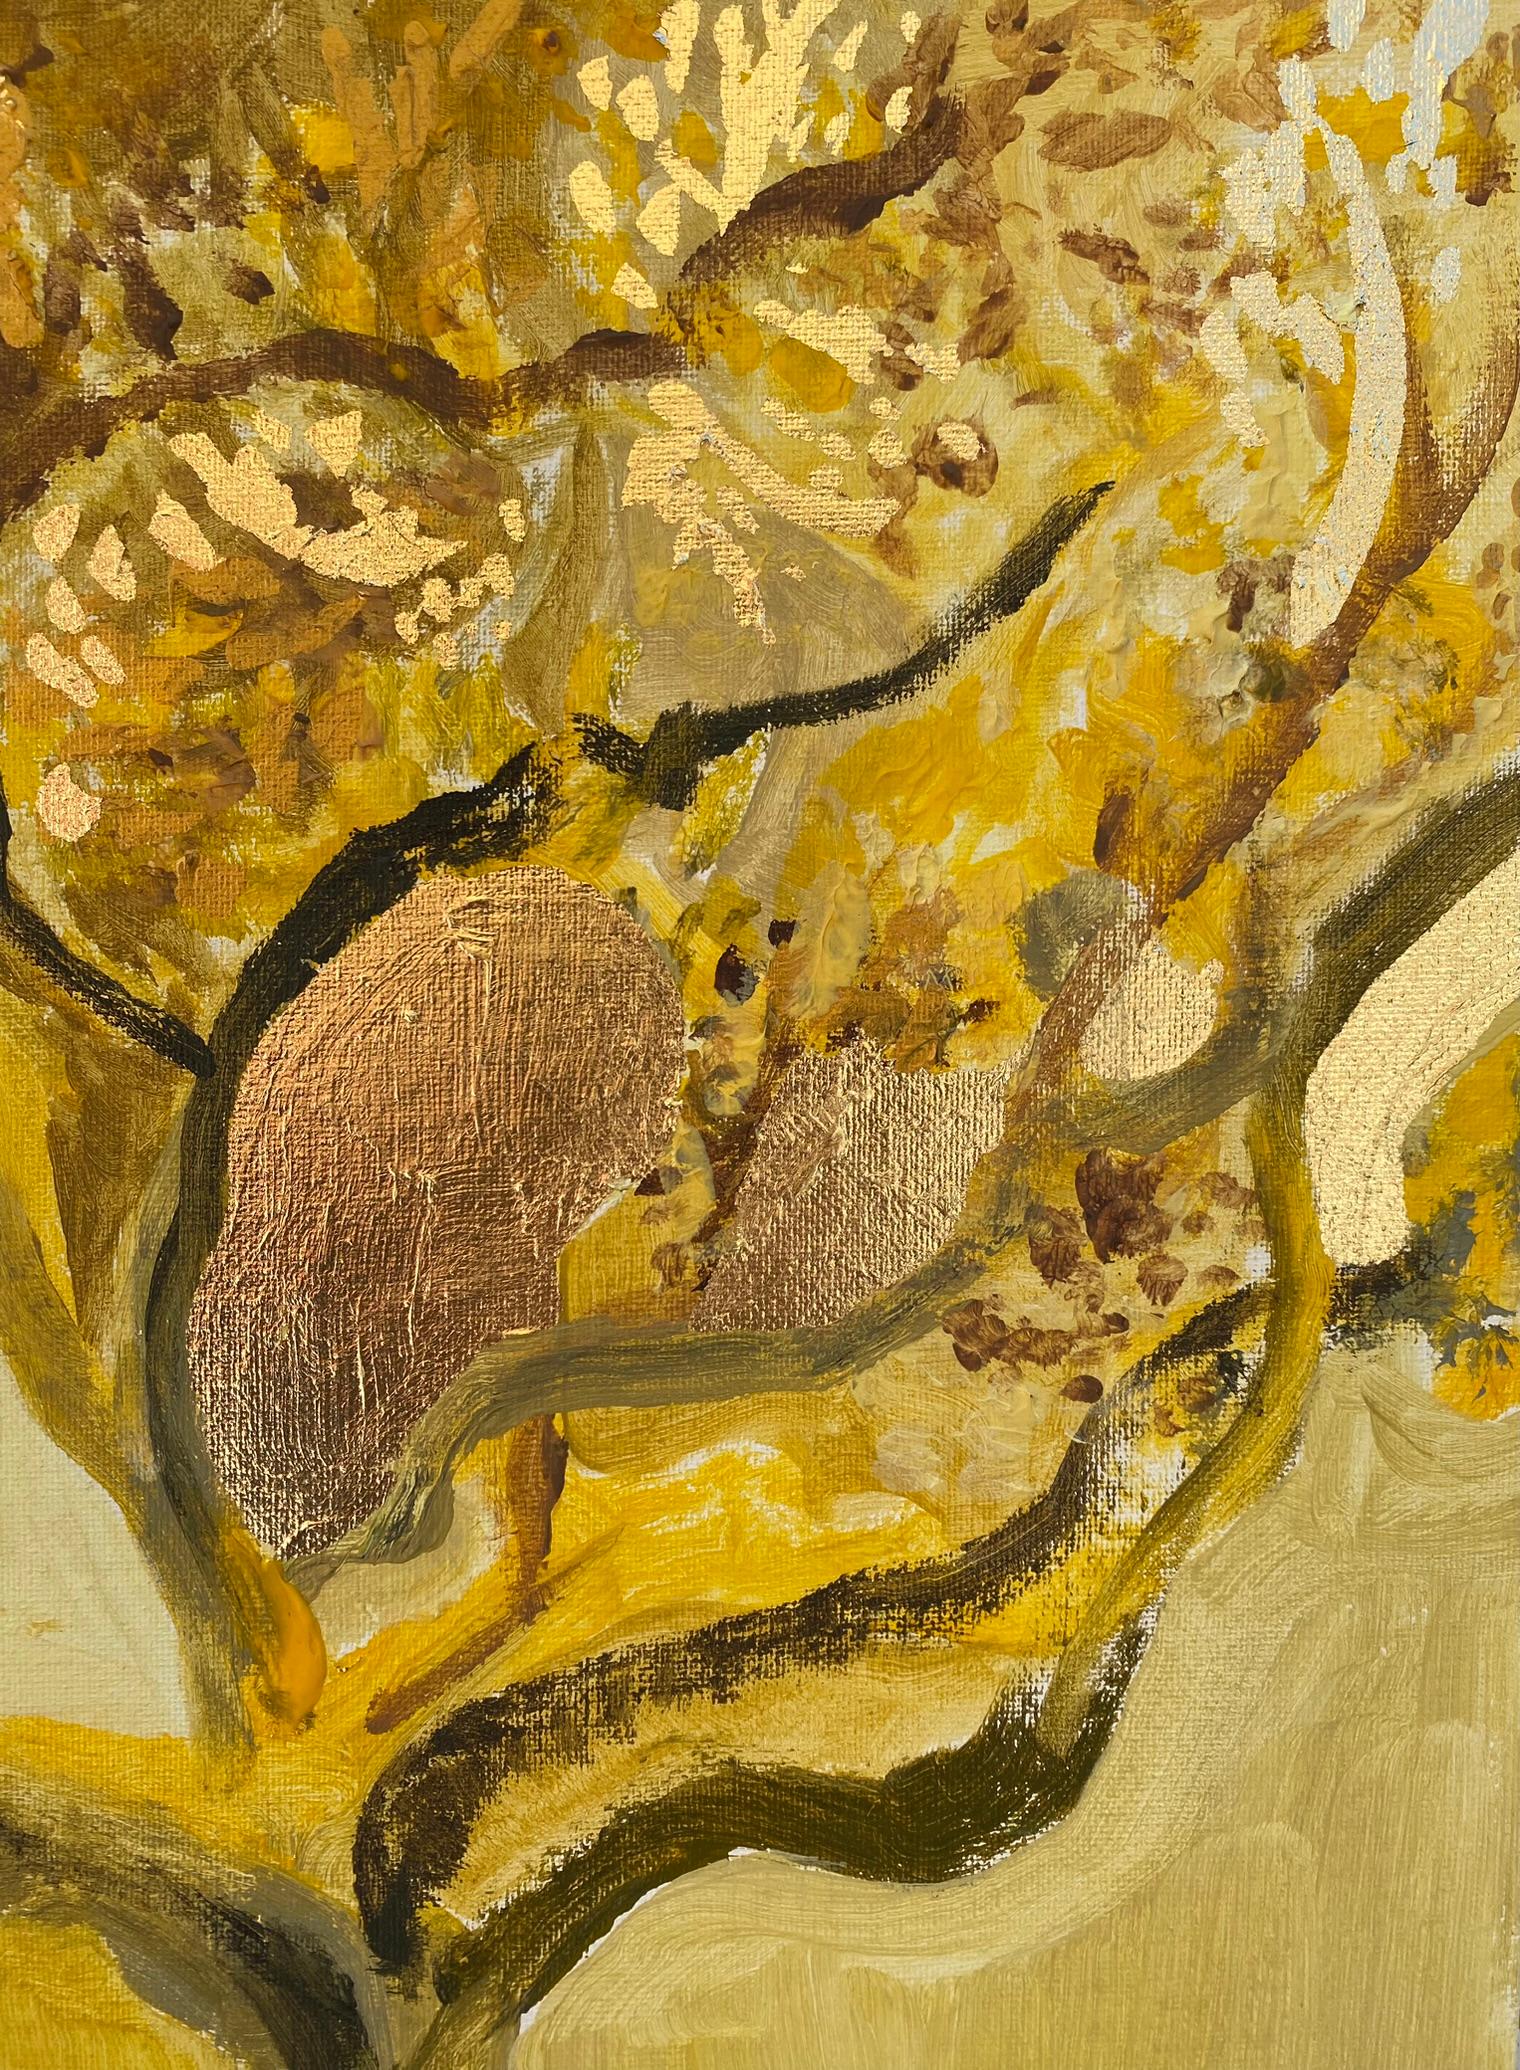 Original-Primary Yellow-Sunlit-Abstract-Expression-Gold Leaf-UK Awarded Artist 2